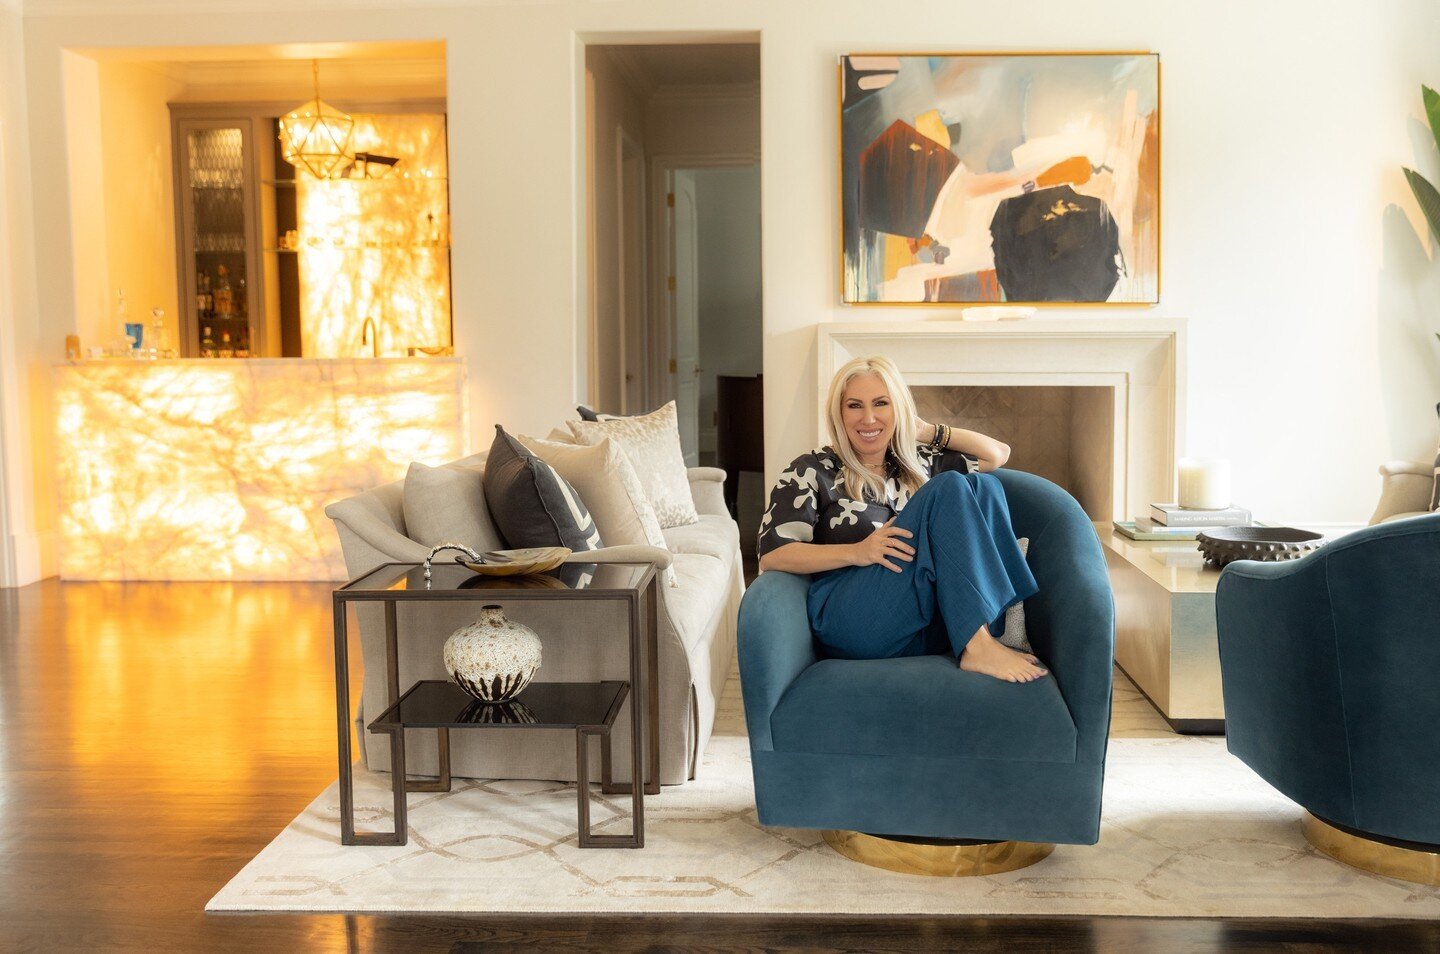 Elevate your home with our bespoke interior design services. Discover a new level of style and sophistication.

Learn more by visiting scarletreagan.com

#scarletreagan #dallasartist #scarletreagangallery #dallasart #dallasartists #dallasartgallery #